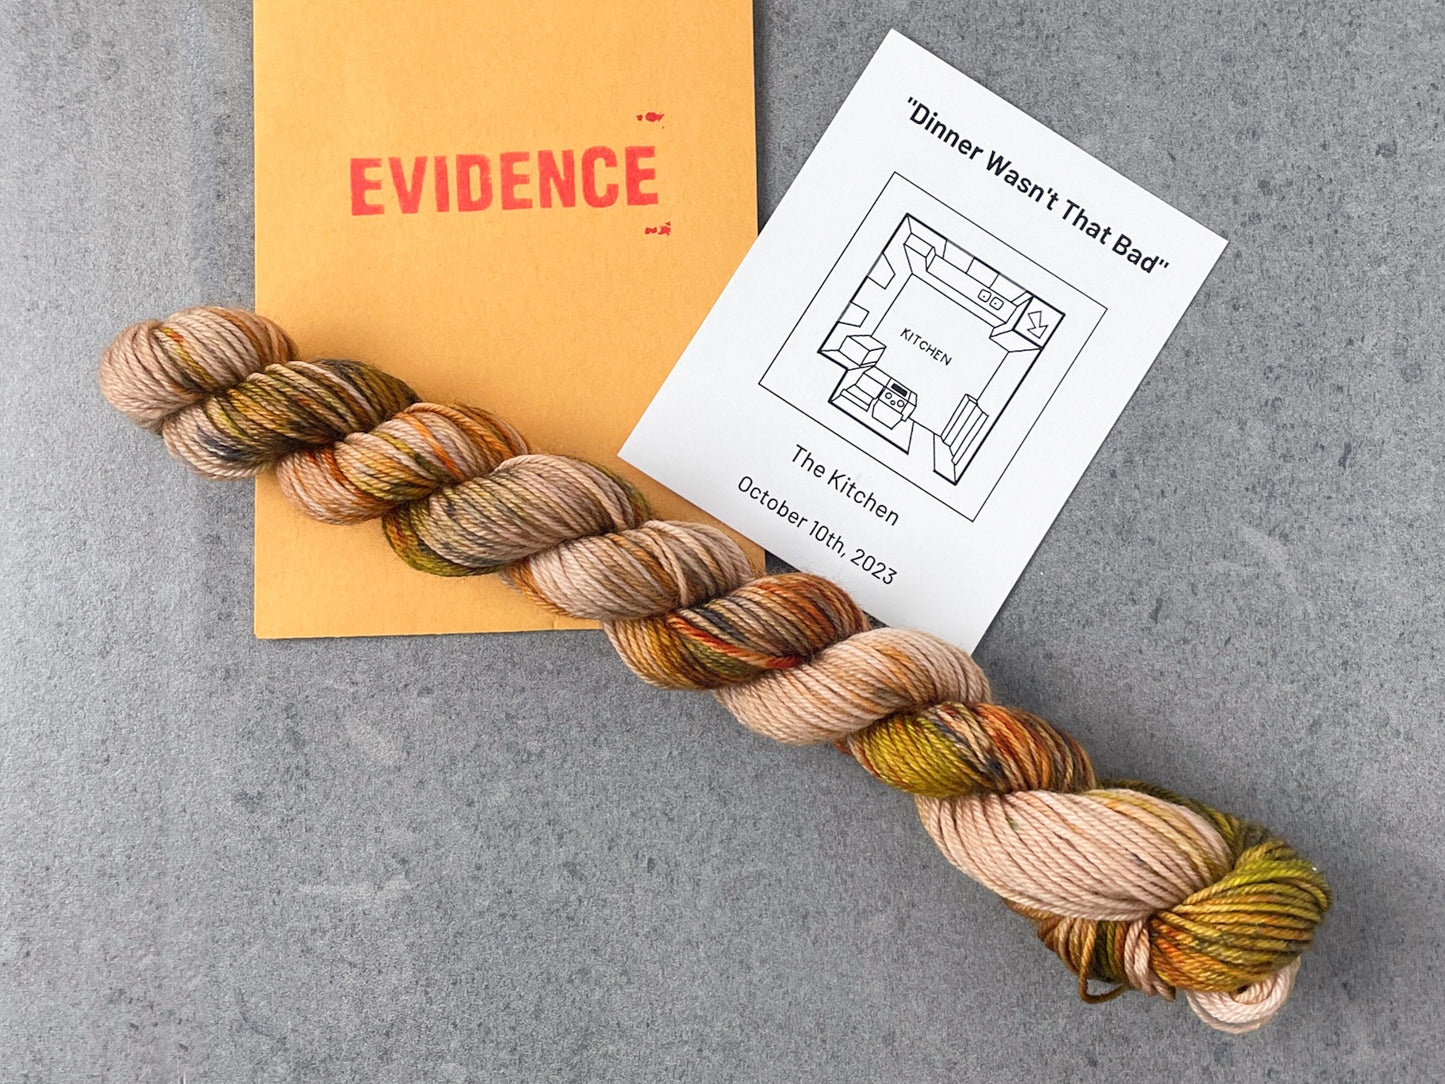 A tan skein of yarn with brown, yellow, orange, and black speckles on top of an envelope stamped with "Evidence" and a card with an overhead drawing of the kitchen on it.